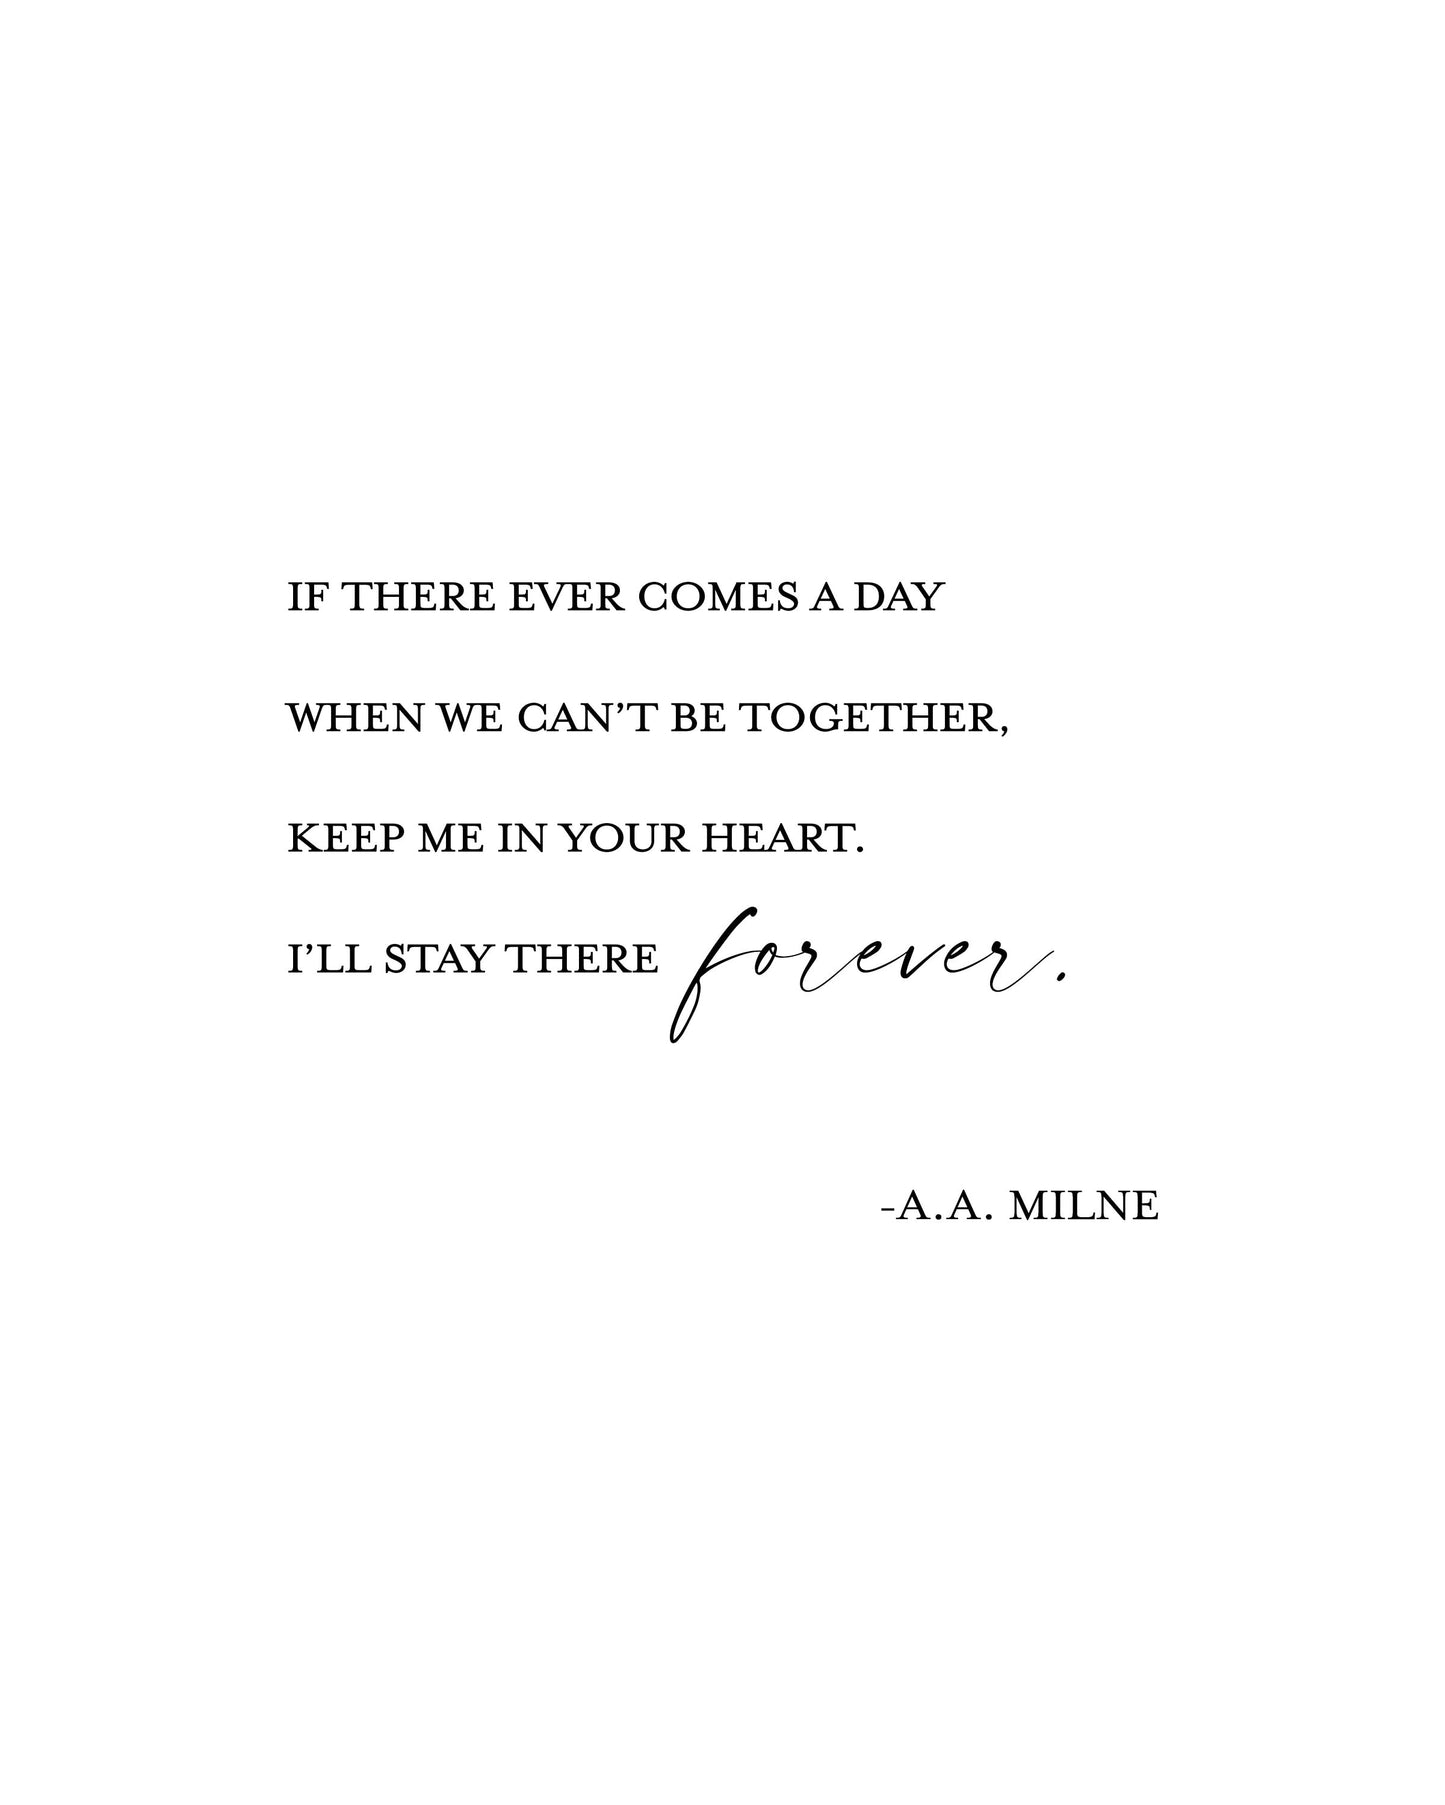 If there ever comes a day when we can’t be together,Keep me in your heart,AA Milne print,Nursery decor,Nursery quote,Winnie the Pooh